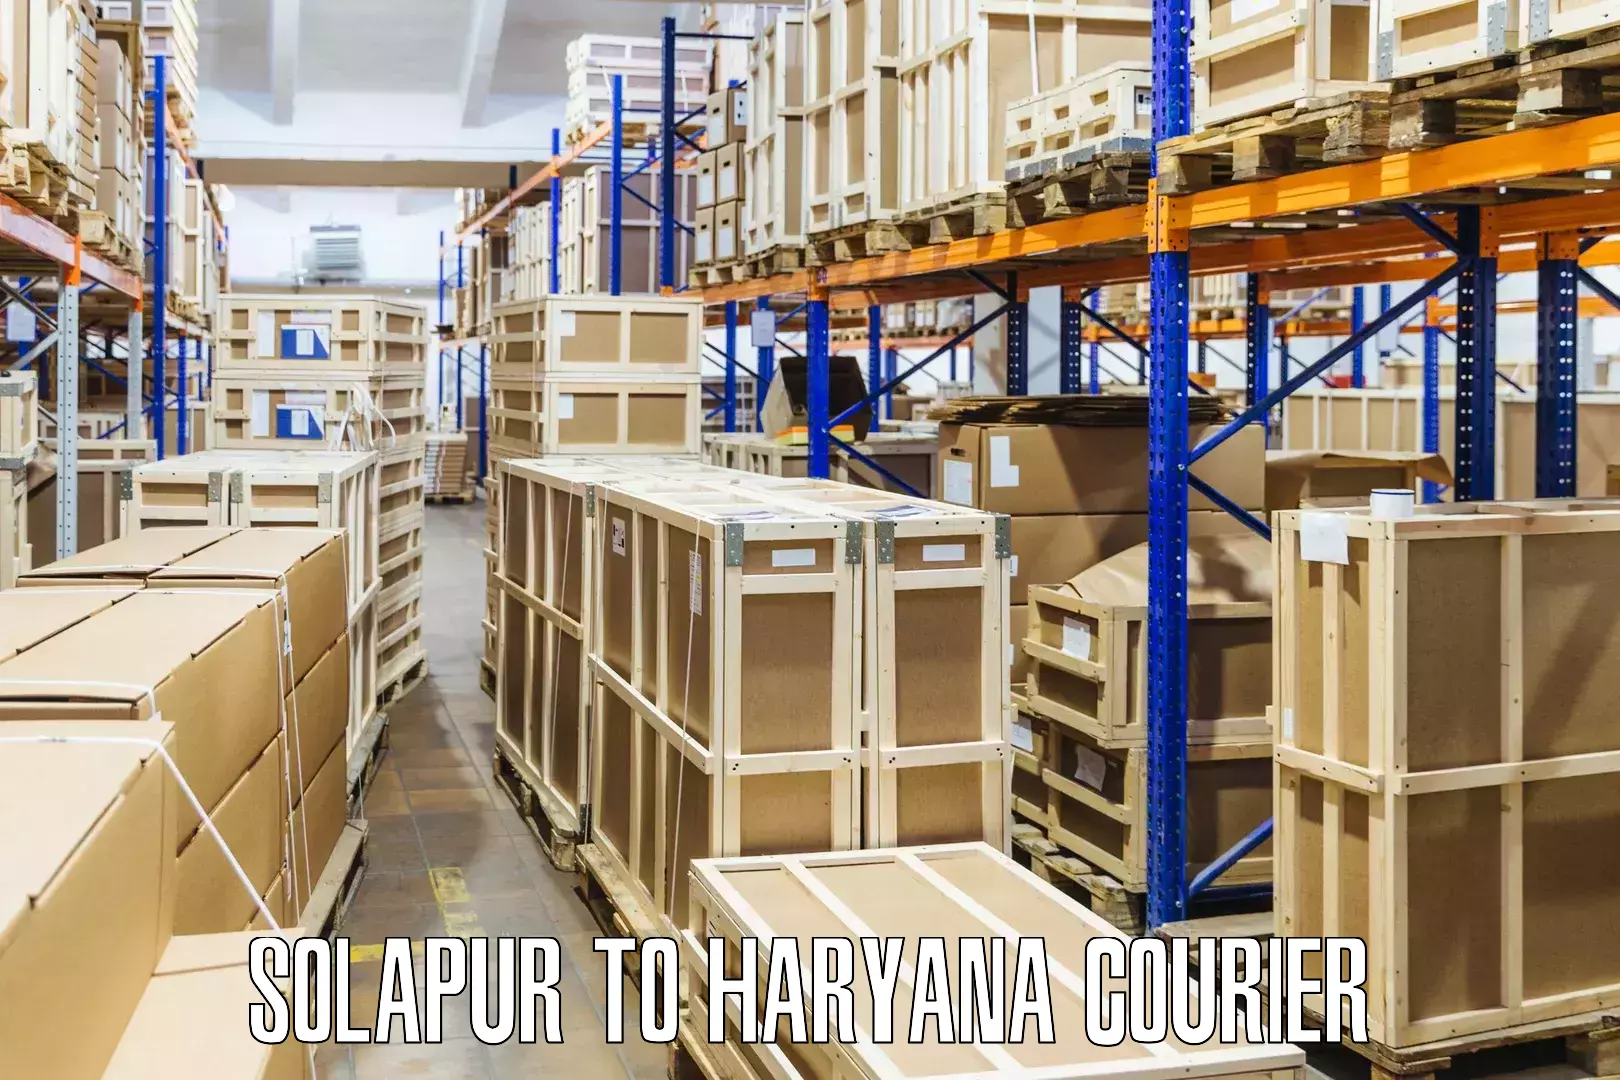 Express courier facilities in Solapur to NCR Haryana